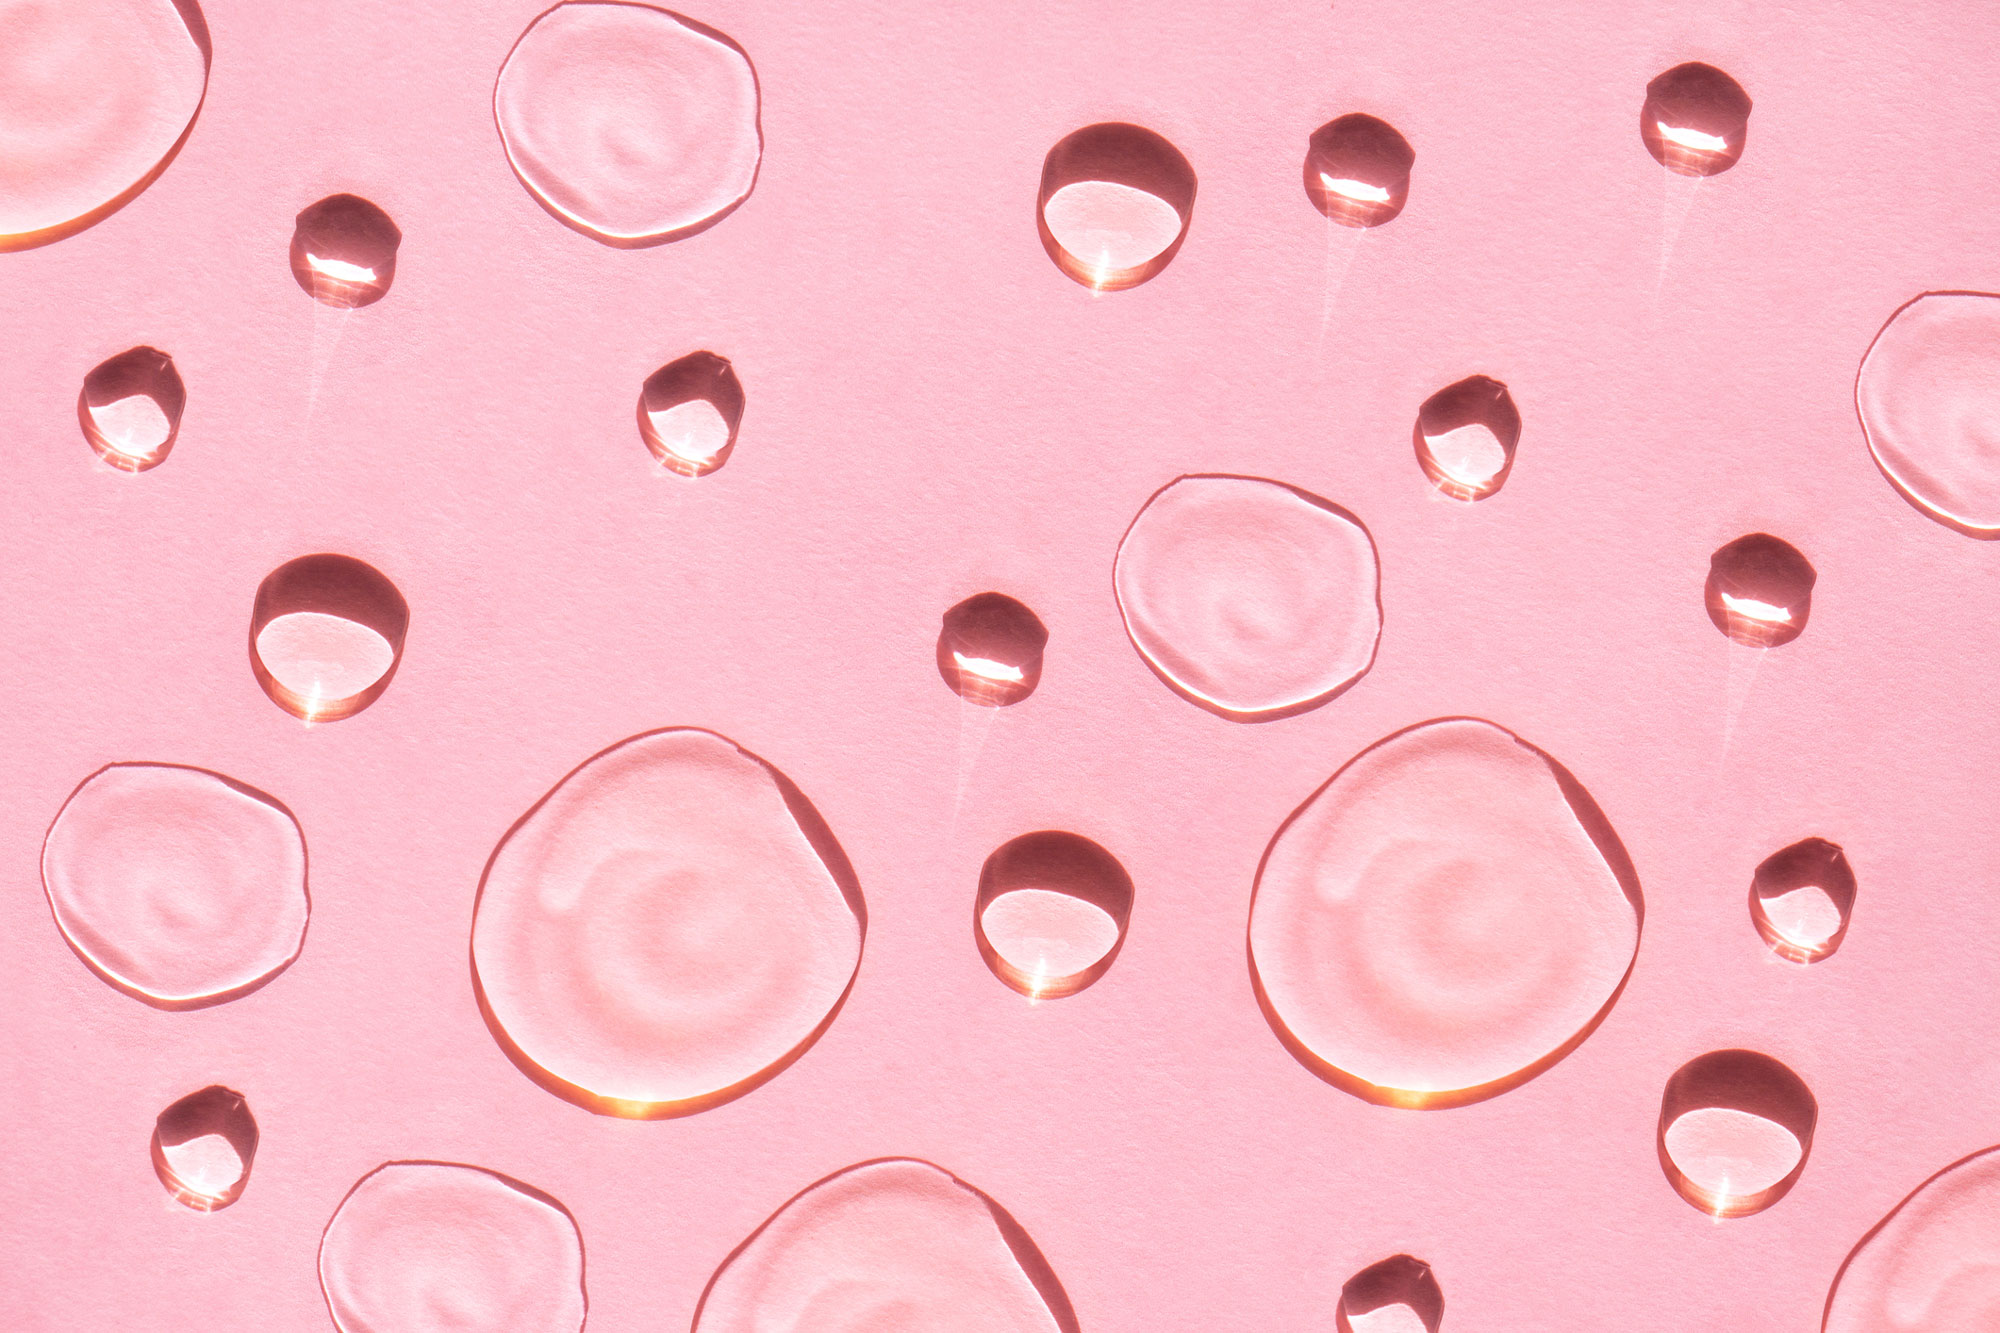 Drops of facial serum or essential oil on pink background